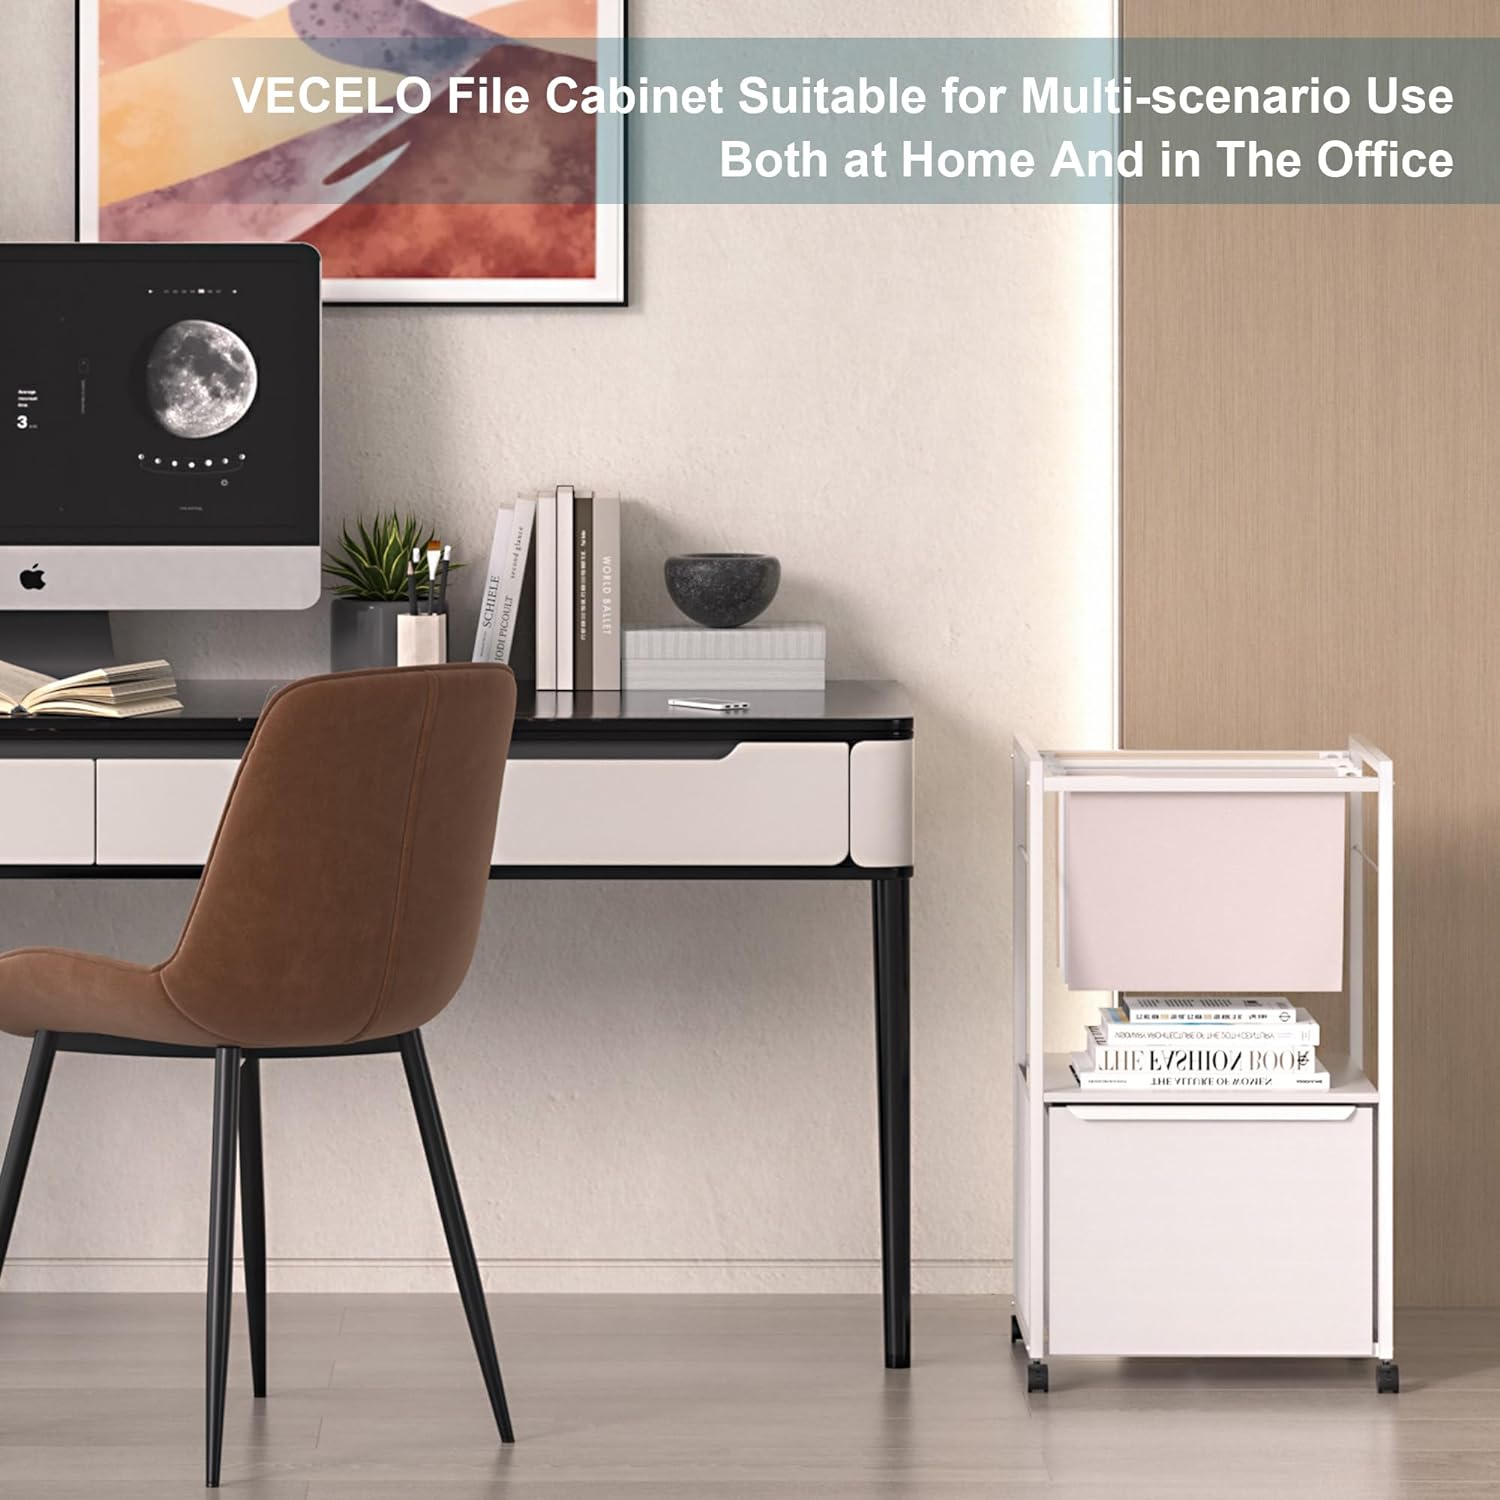 VECELO Filing Cabinet/Organization for Hanging Files